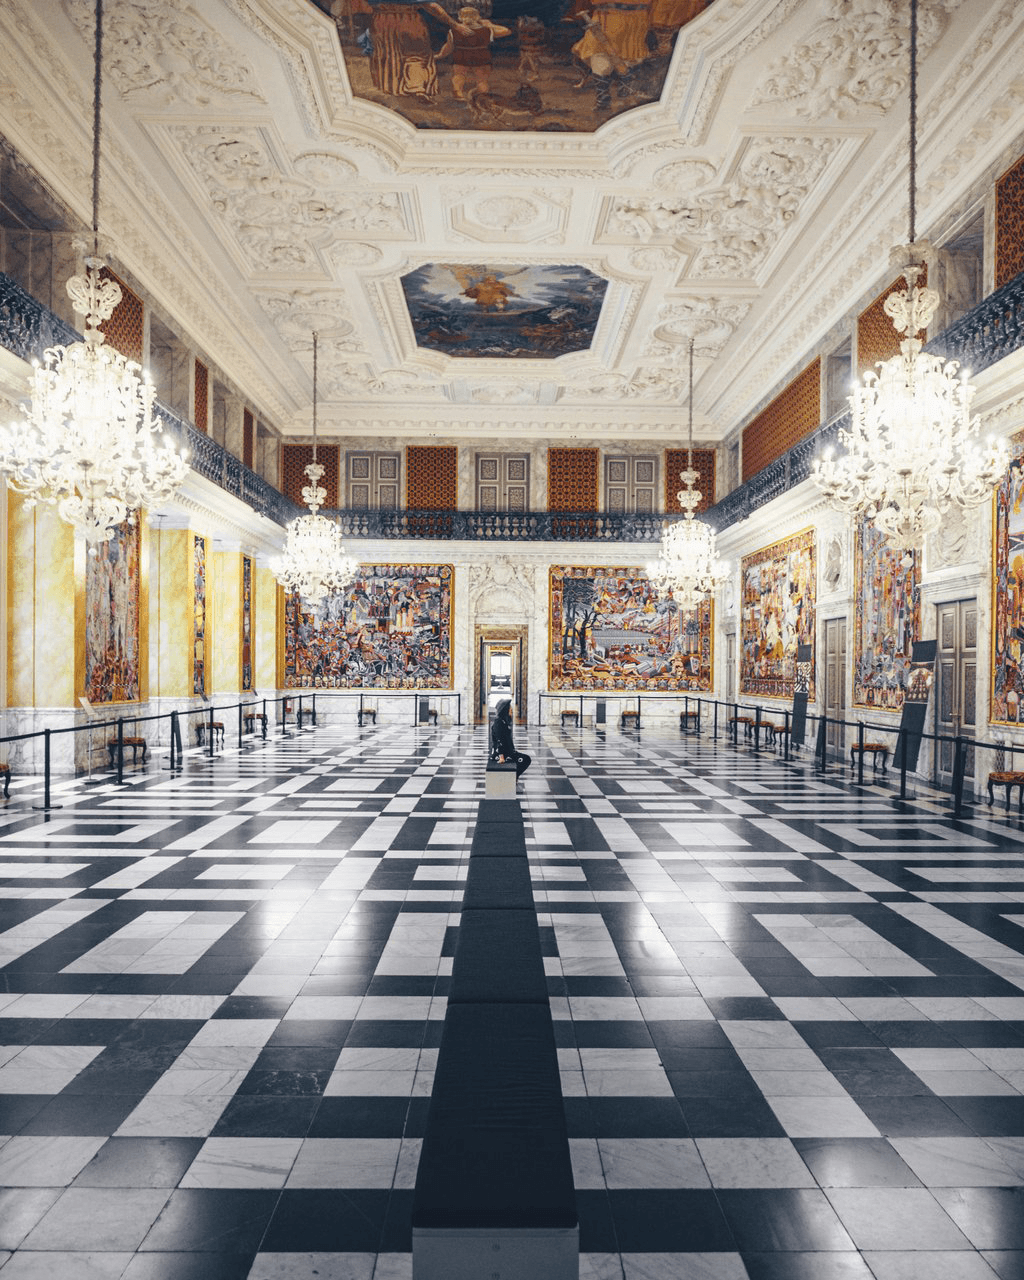 The Queen's Tapestries at Christiansborg Palace in Copenhagen. Photo by Daniel Rasmussen